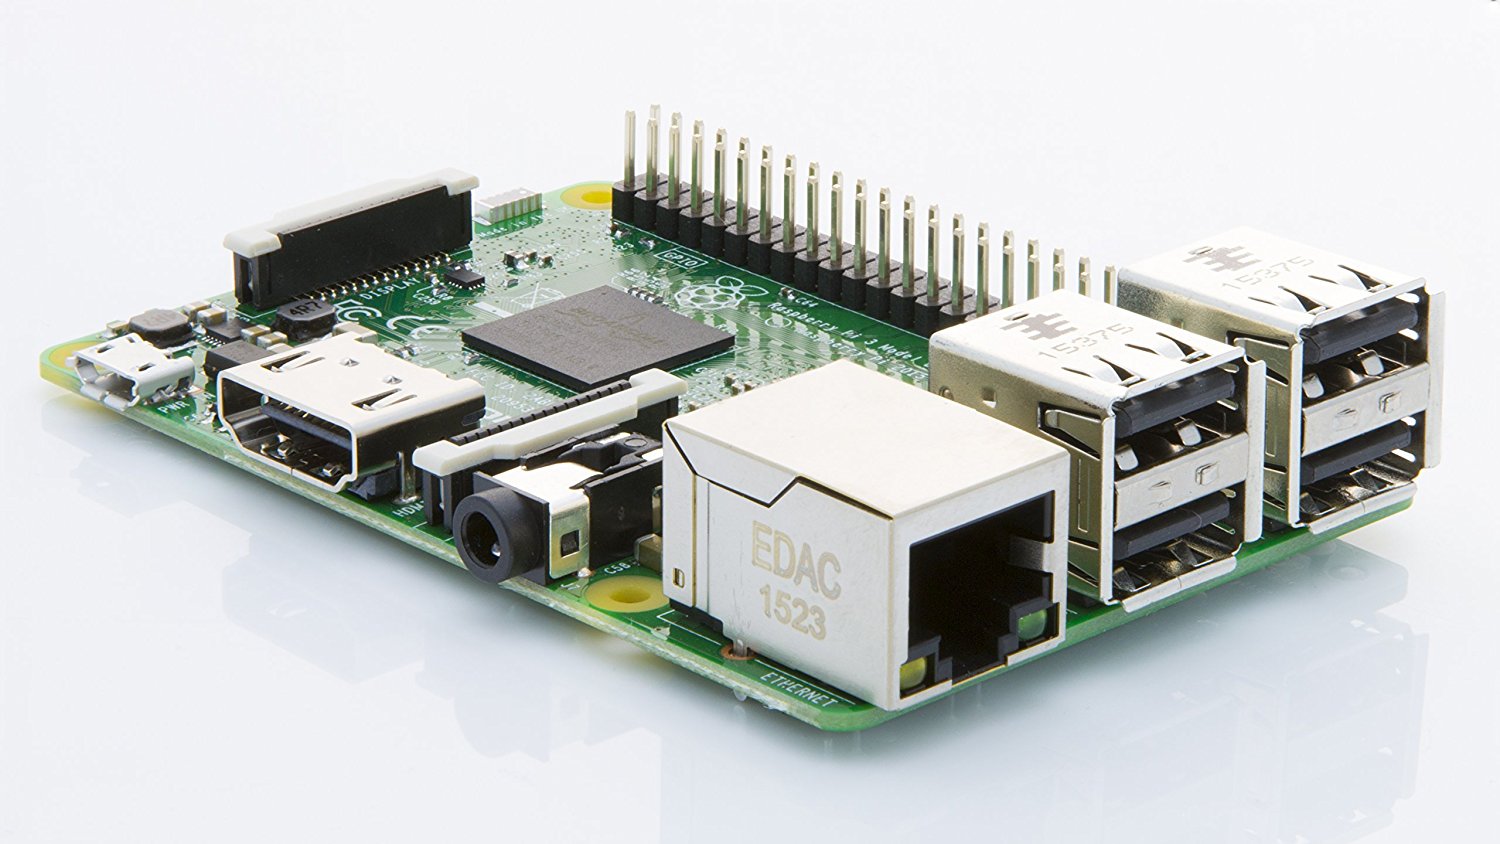 Basic projects that use the GPIO pins and you can build with a Raspberry pi